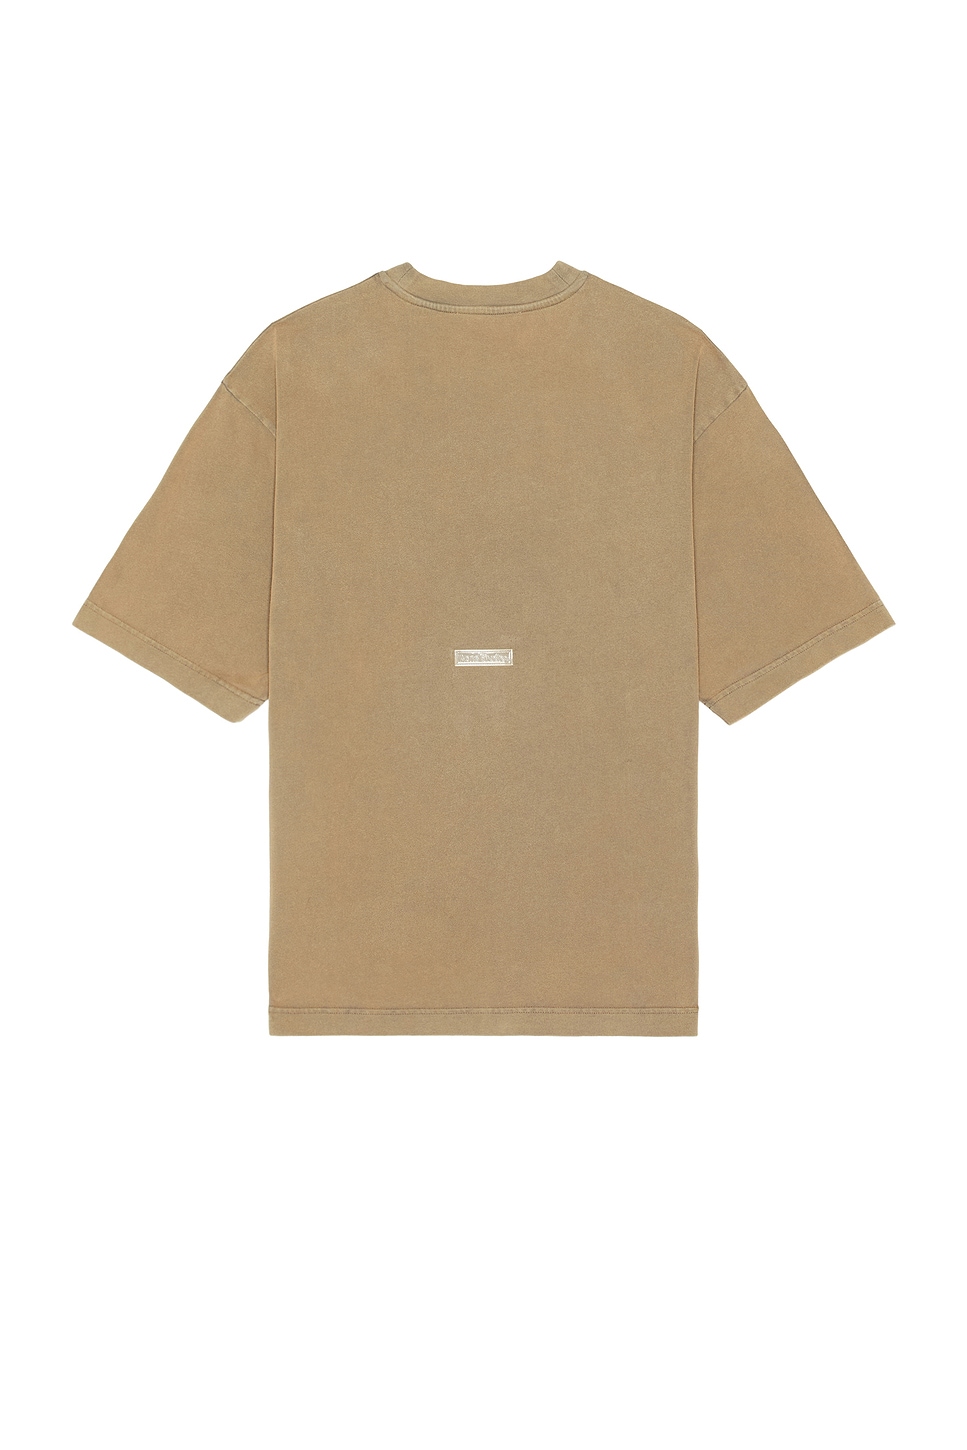 Image 1 of Acne Studios T-shirt in Taupe Brown